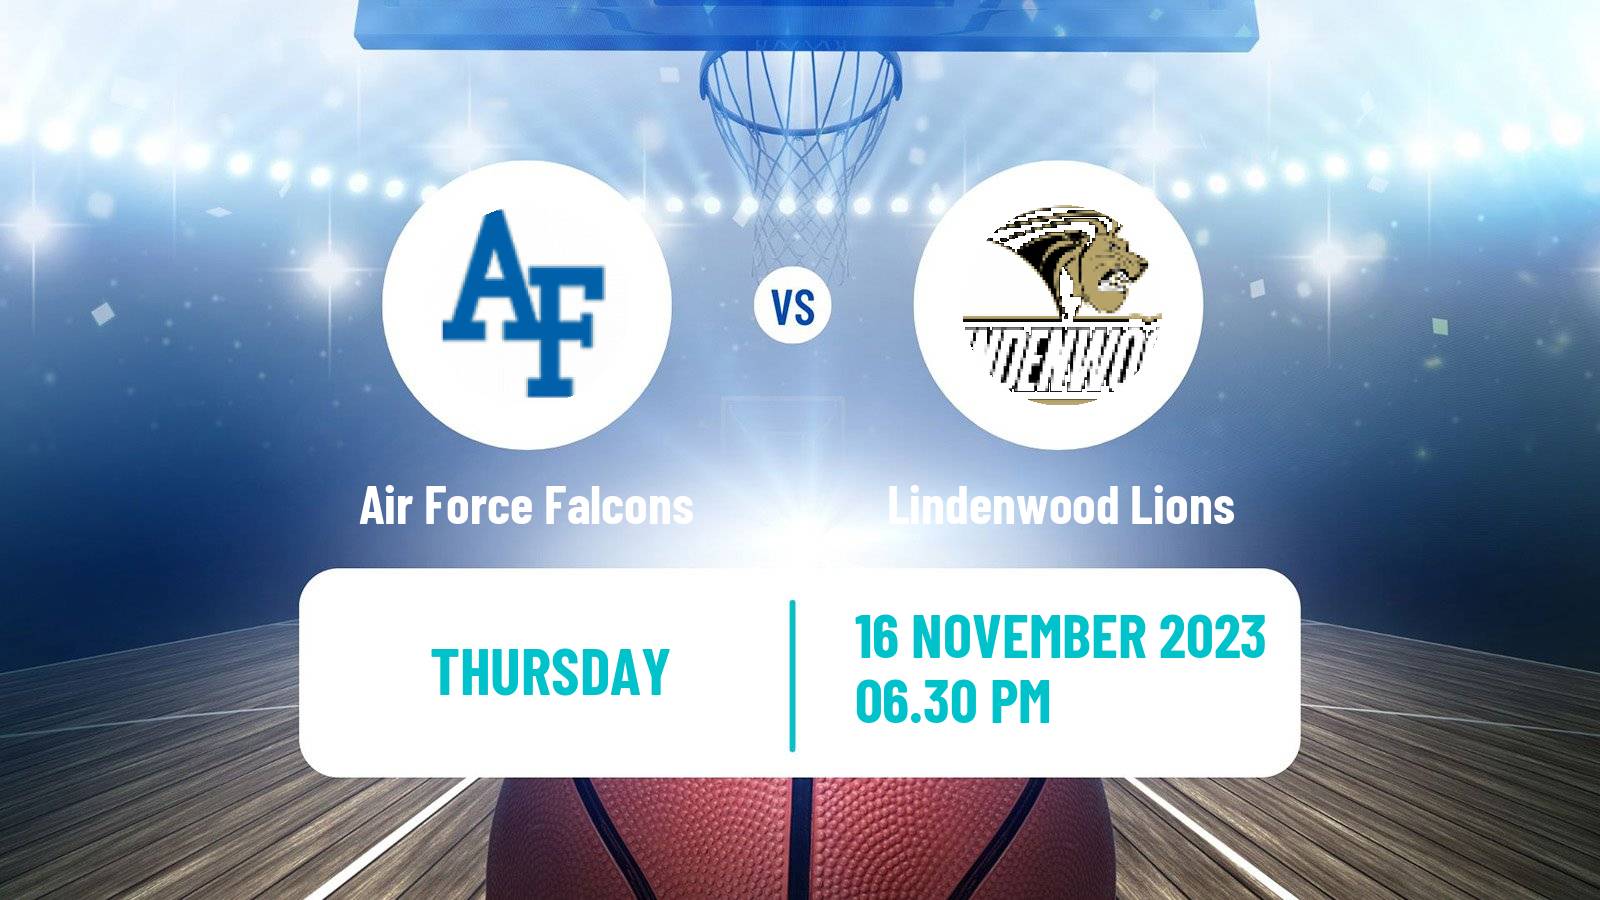 Basketball NCAA College Basketball Air Force Falcons - Lindenwood Lions